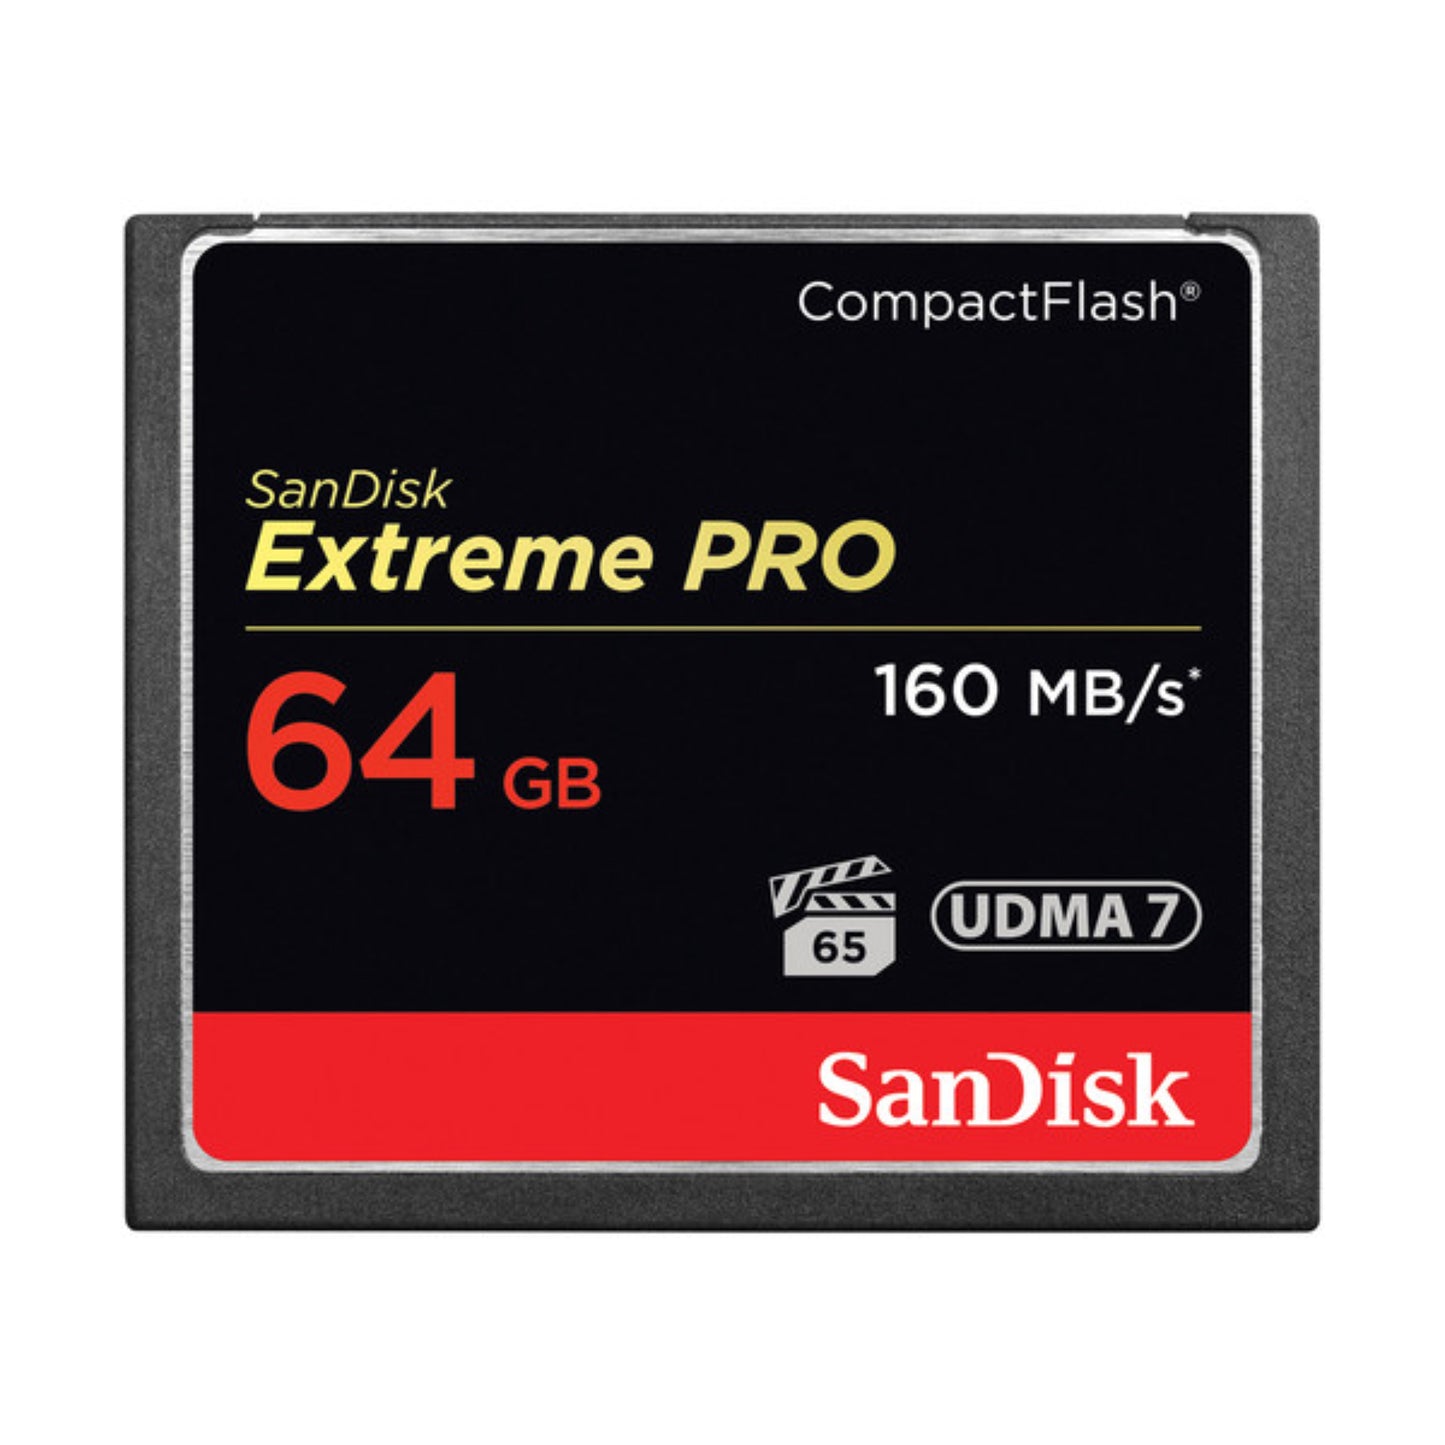 Buy Sandisk Extreme Pro 160Mb/s 64Gb CF Card | Topic Store